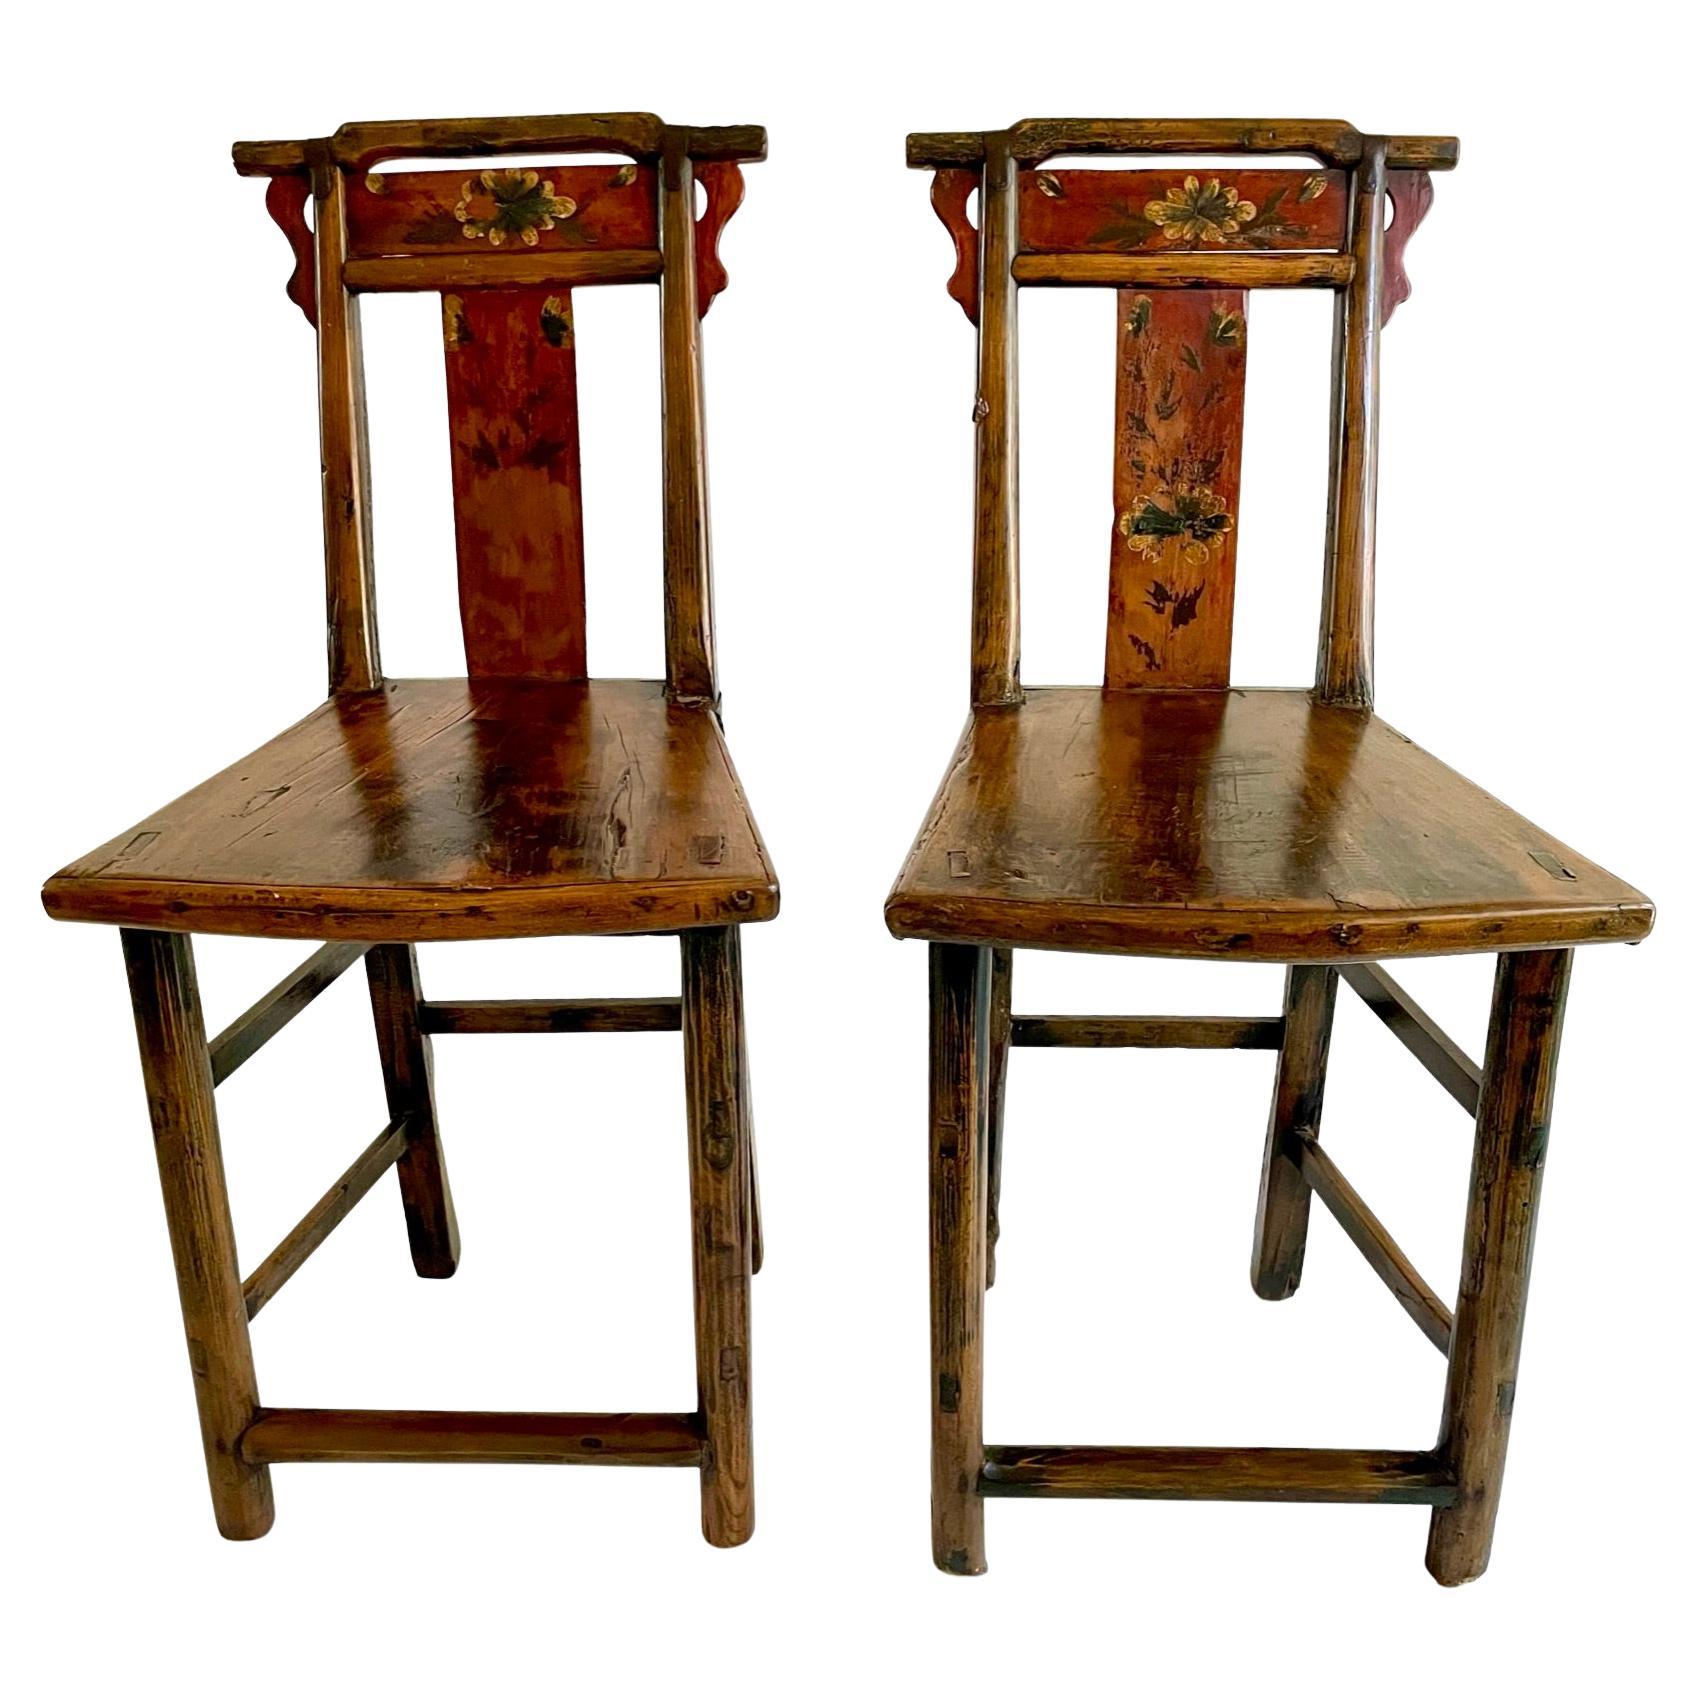 Pair of Painted Late 18th Century Chinese Chairs